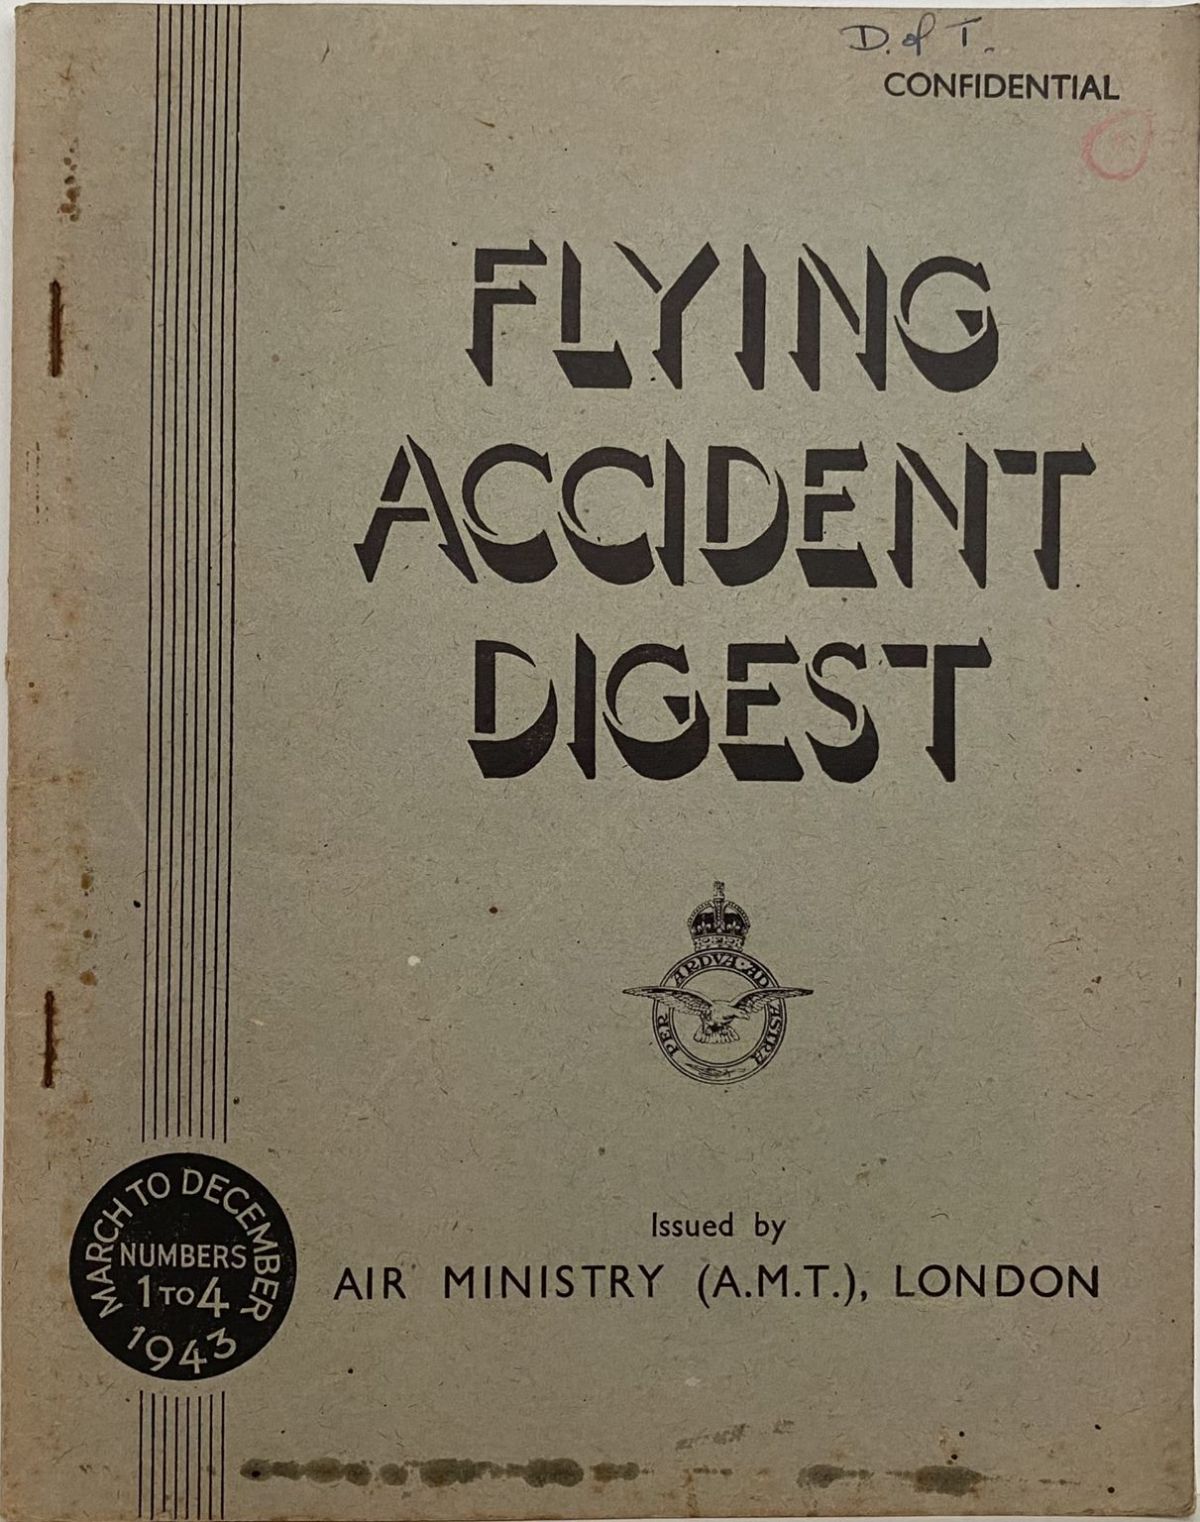 FLYING ACCIDENT DIGEST No's 1-4